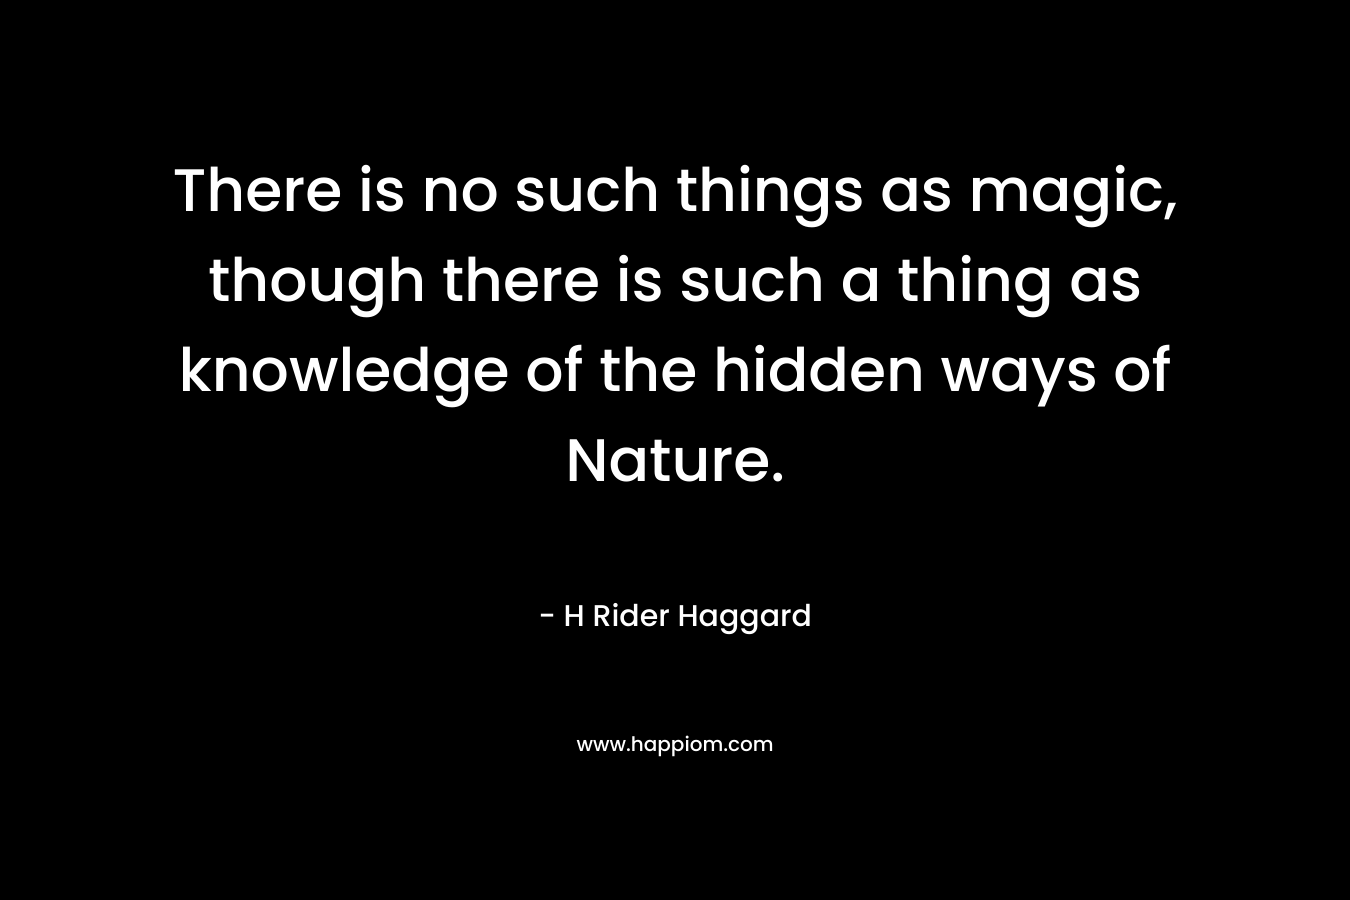 There is no such things as magic, though there is such a thing as knowledge of the hidden ways of Nature.